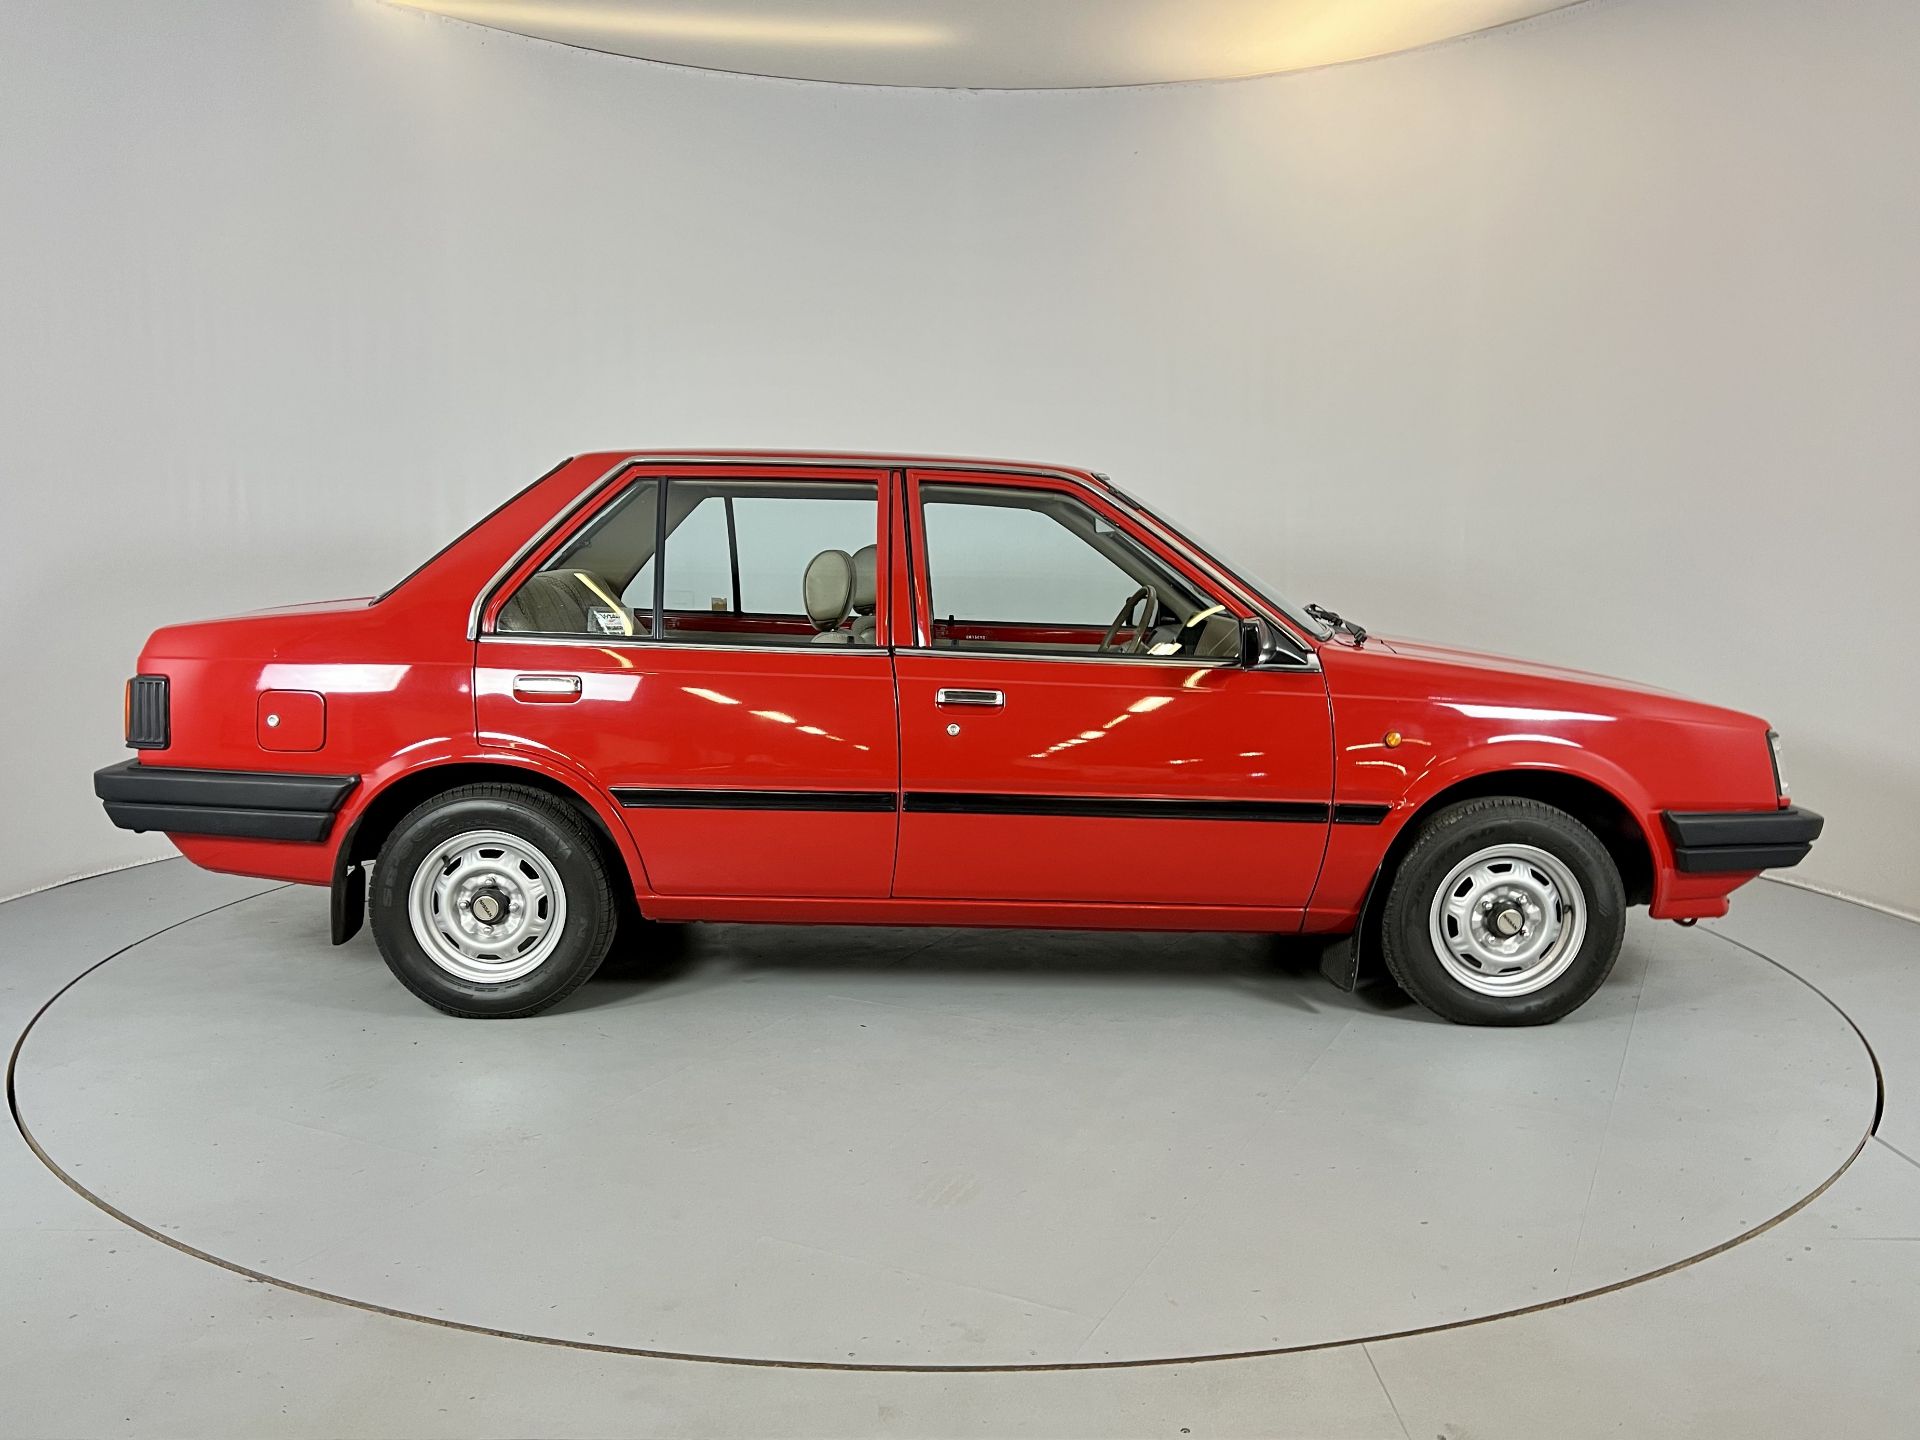 Nissan Sunny - Image 11 of 35